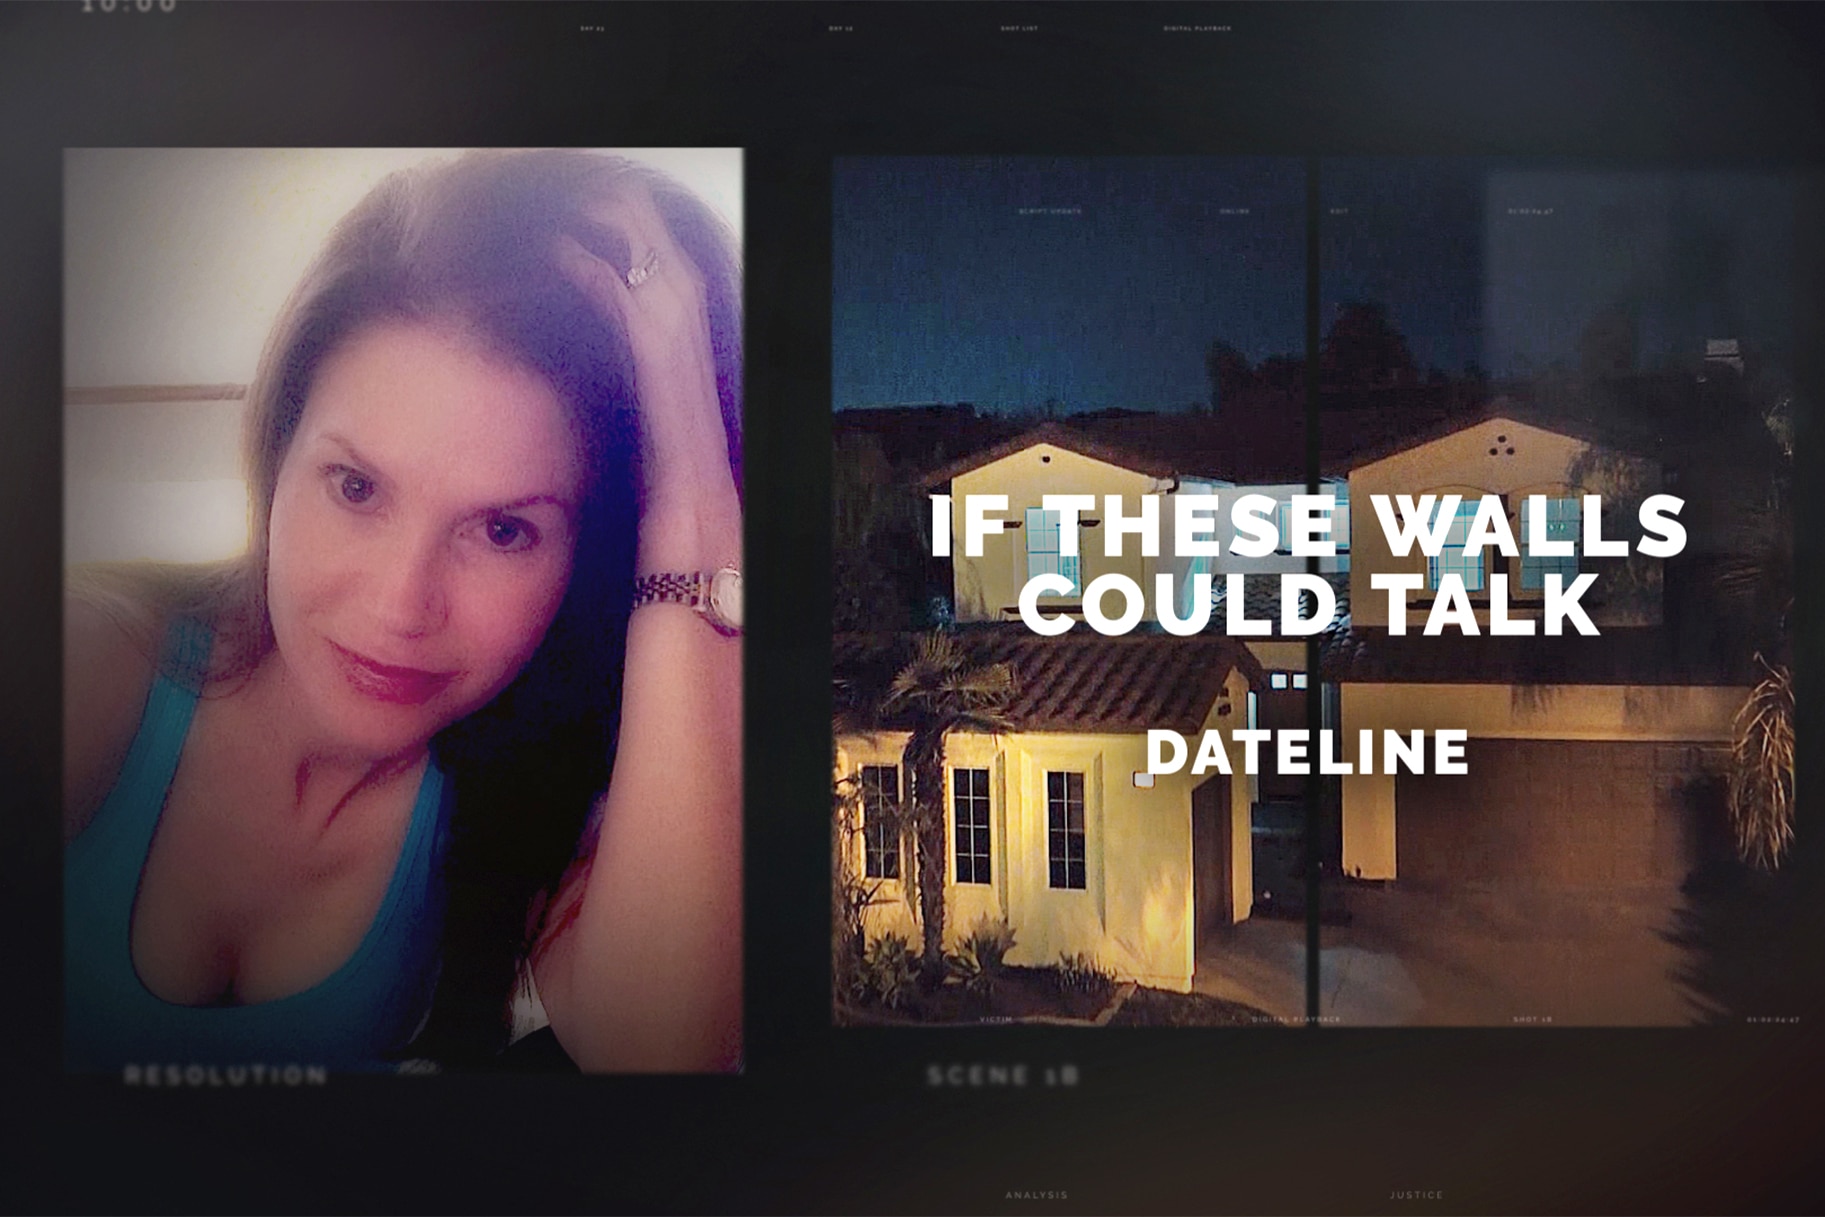 Susann Sills featured on Dateline: If These Walls Could Talk